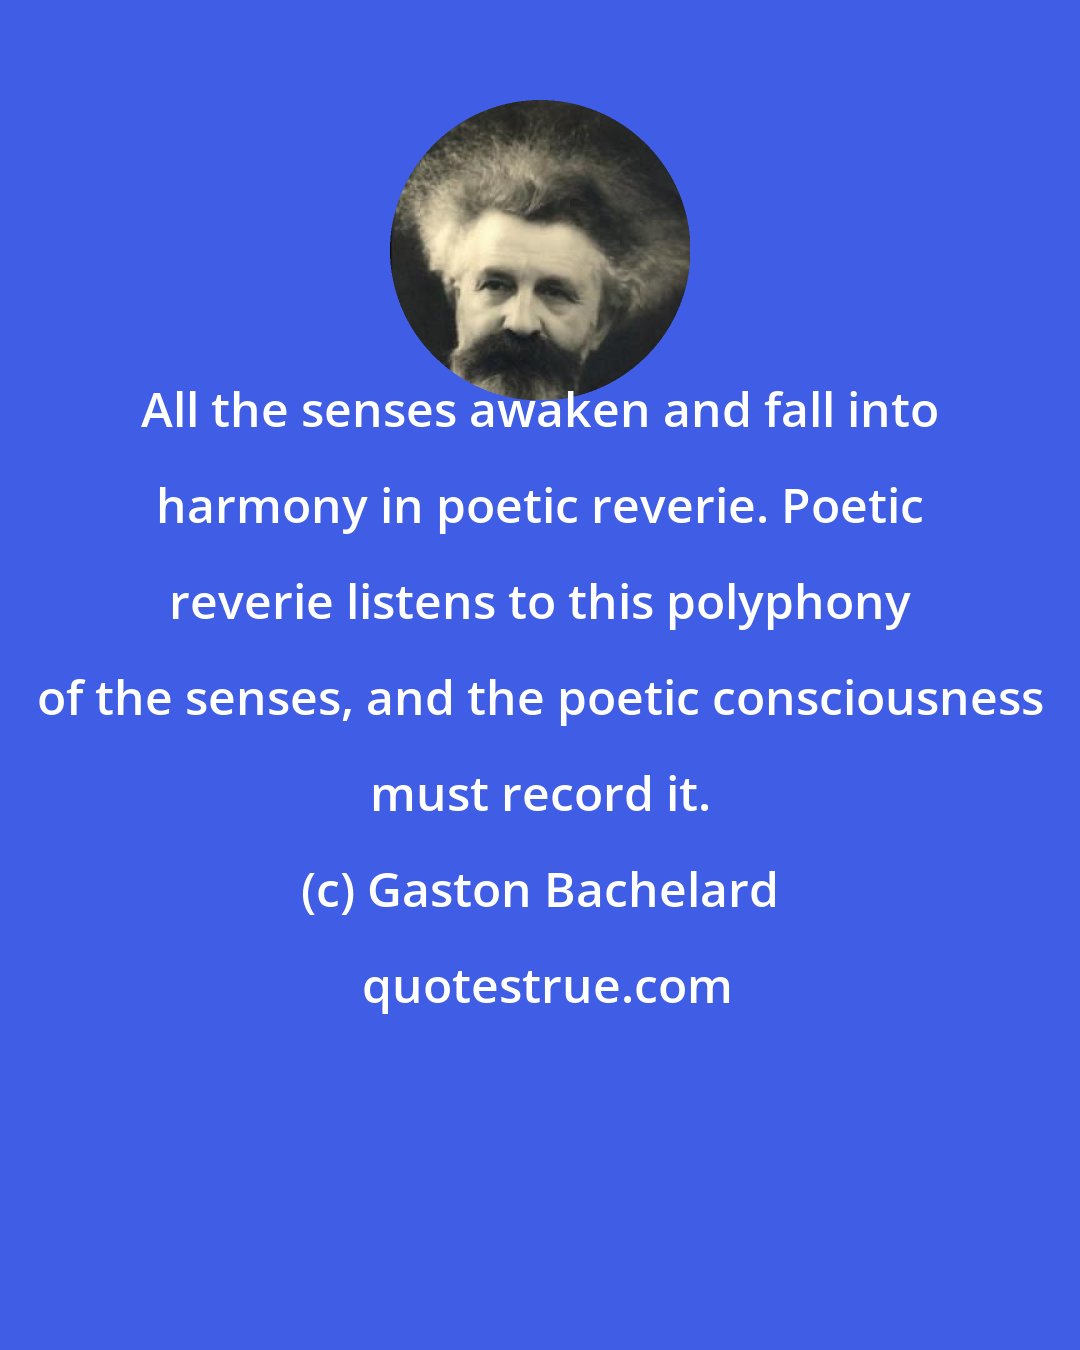 Gaston Bachelard: All the senses awaken and fall into harmony in poetic reverie. Poetic reverie listens to this polyphony of the senses, and the poetic consciousness must record it.